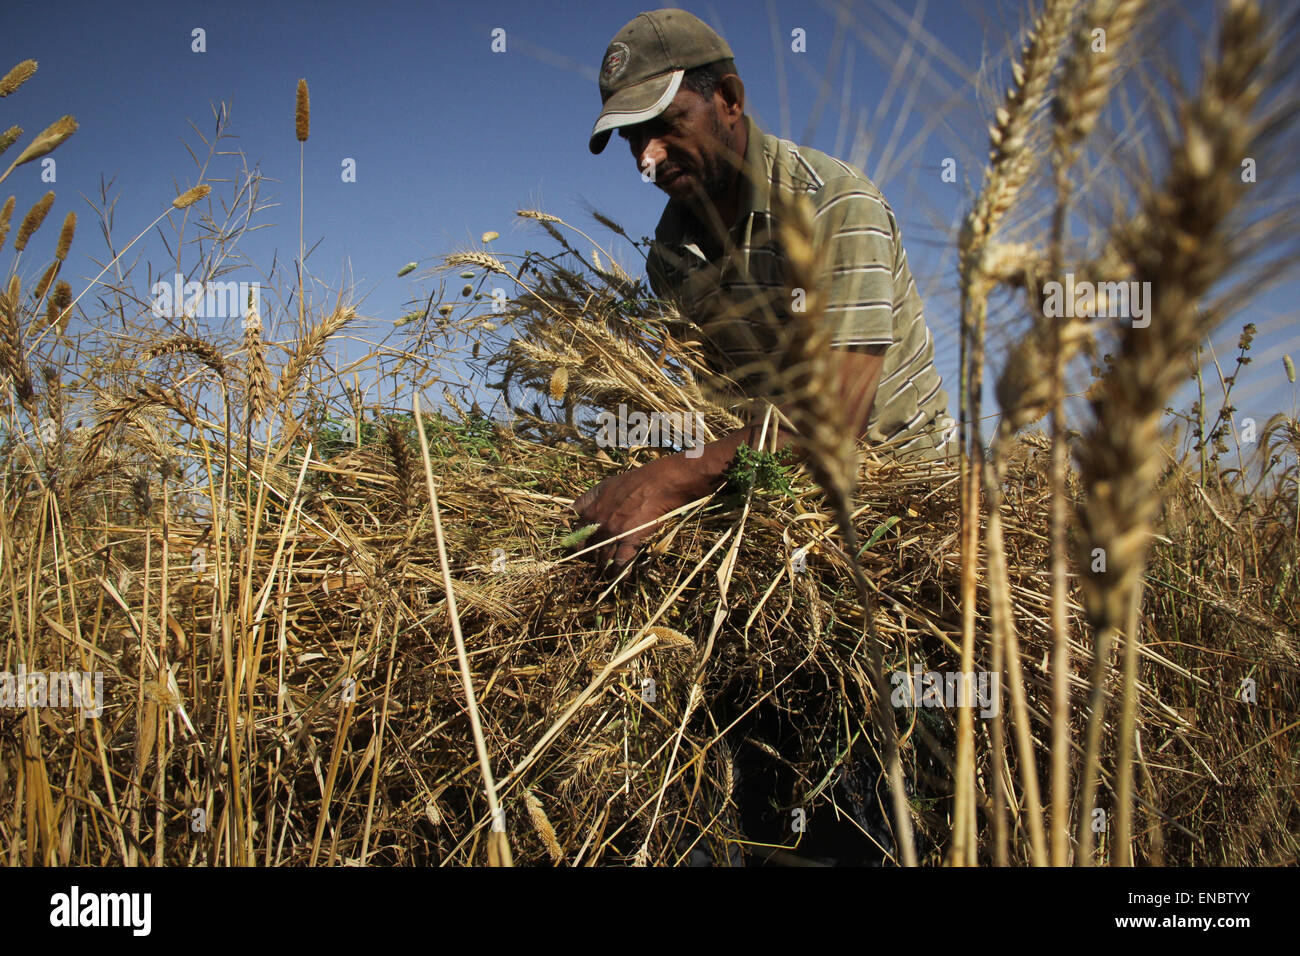 Khan Yunis, Palestine. 02nd May, 2015. Khan Younis, Gaza Strip, Palestinian Territory - A Palestinian farmer collects wheat stalks during the annual harvest in a field in Khuza'a east of Khan Yunis, in the southern Gaza Strip. Khan Younis, Gaza Strip, Palestinian Territory - Palestinian farmers collects wheat stalks during the annual harvest in a field in Khuza'a east of Khan Yunis, in the southern Gaza Strip. © Ahmed Hjazy/Pacific Press/Alamy Live News Stock Photo